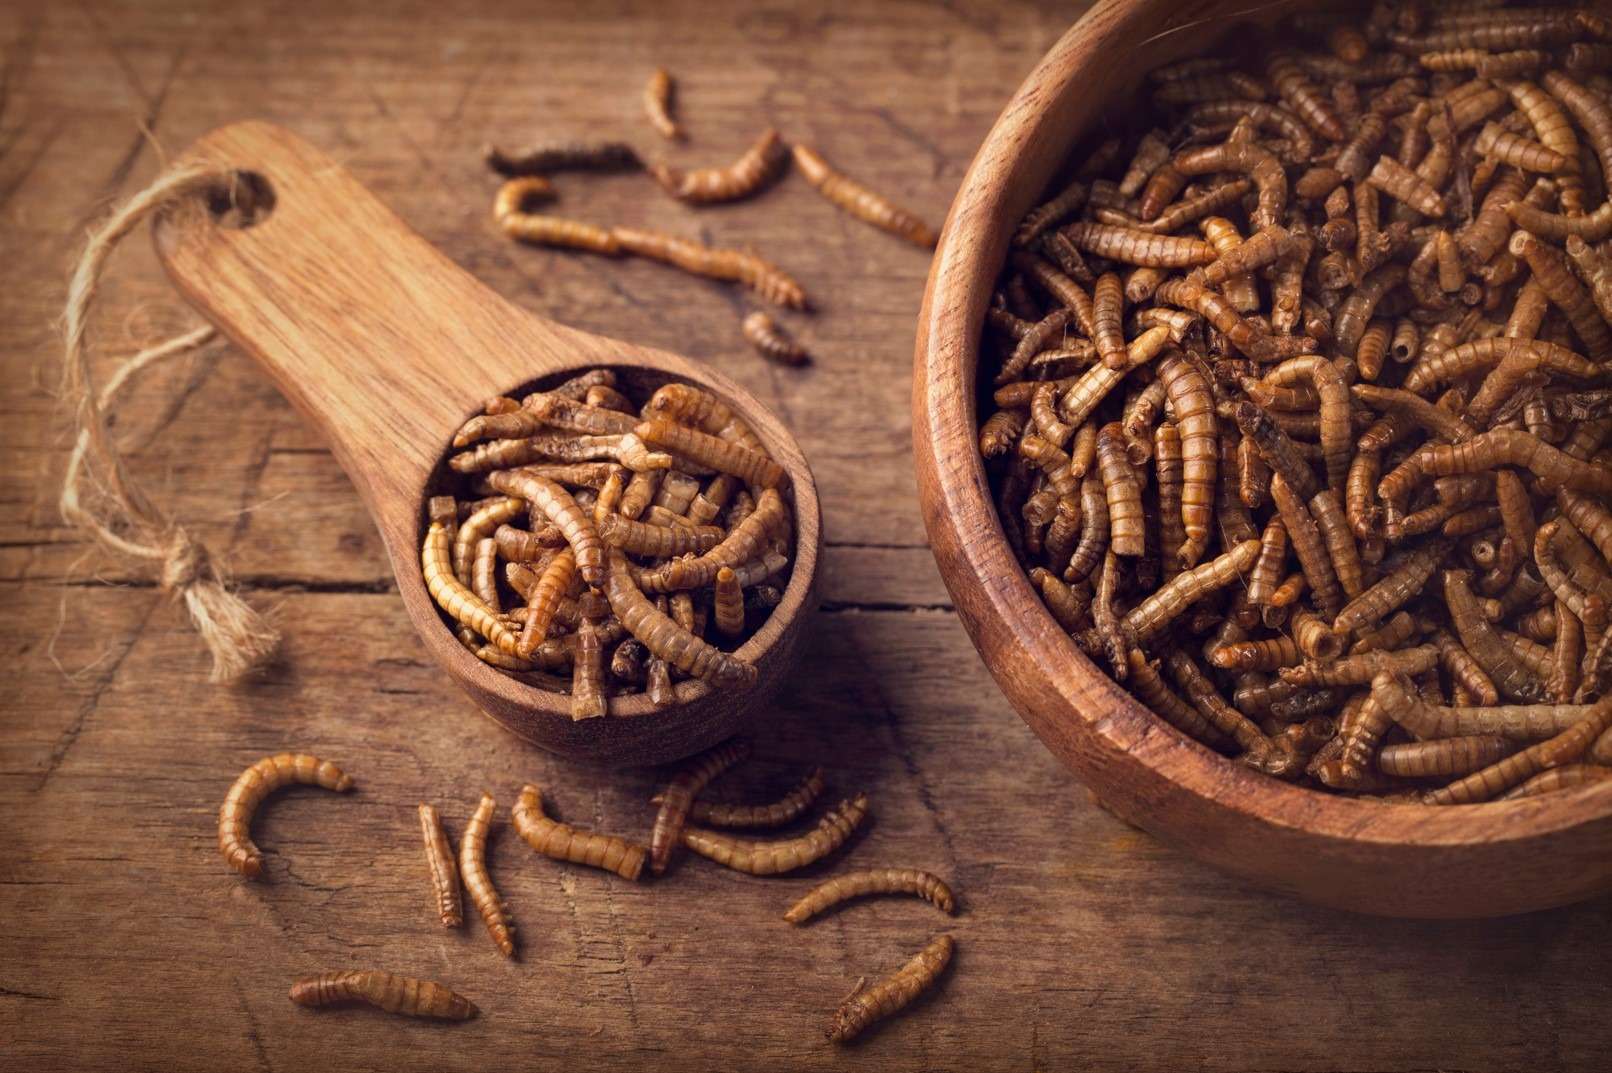 Power for food insects